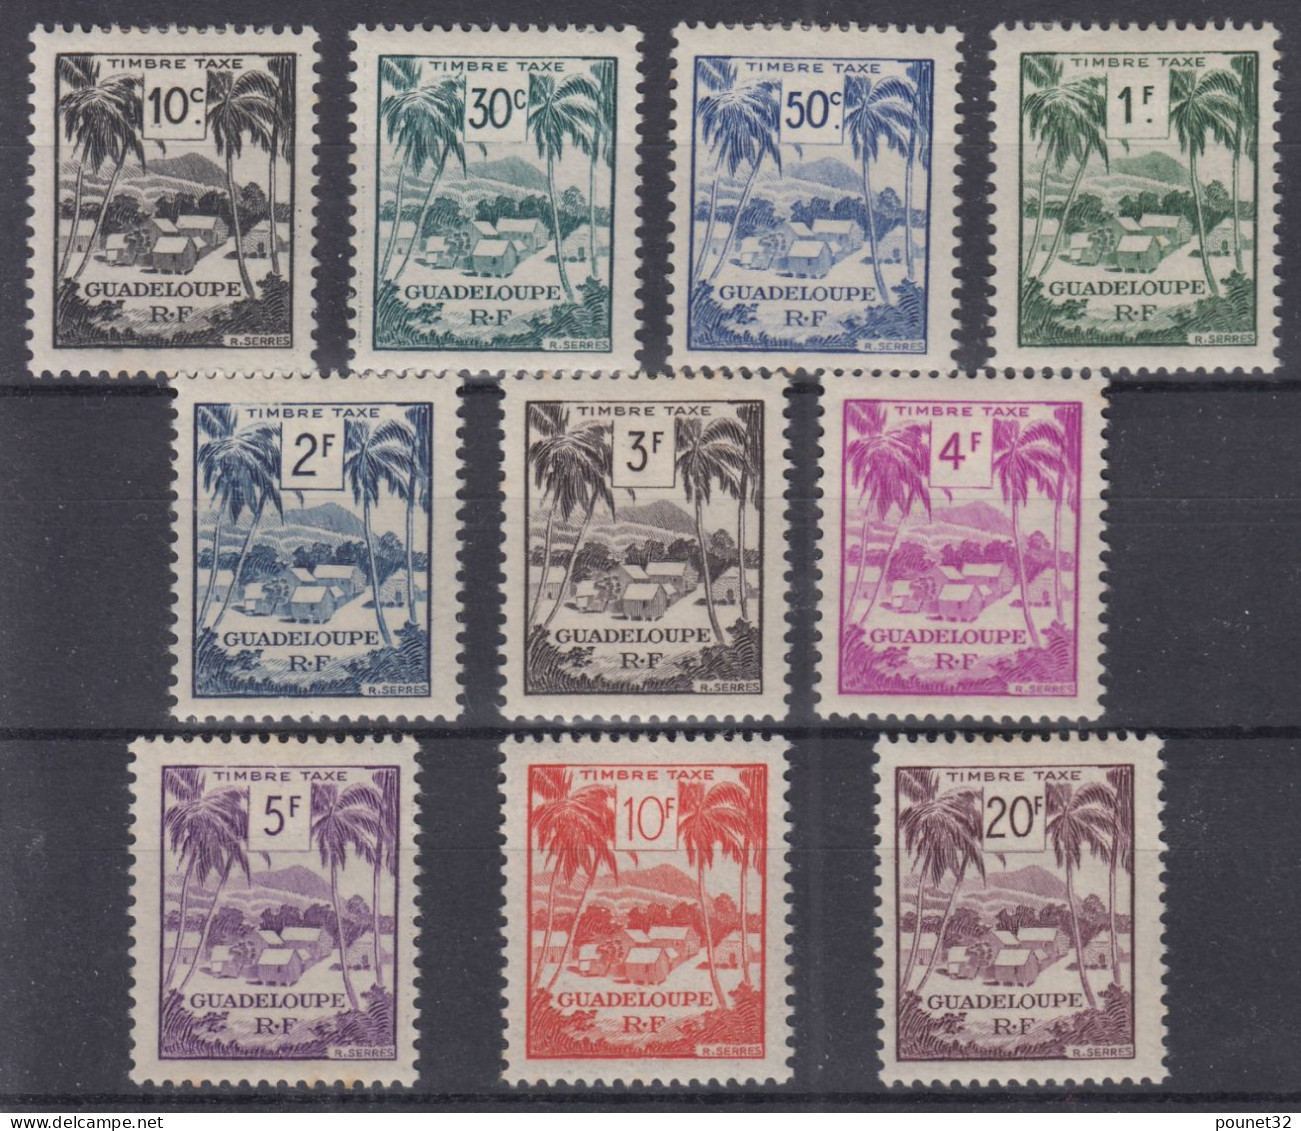 GUADELOUPE 1947 SERIE TAXE N° 41/50 NEUFS * GOMME AVEC CHARNIERE - Timbres-taxe